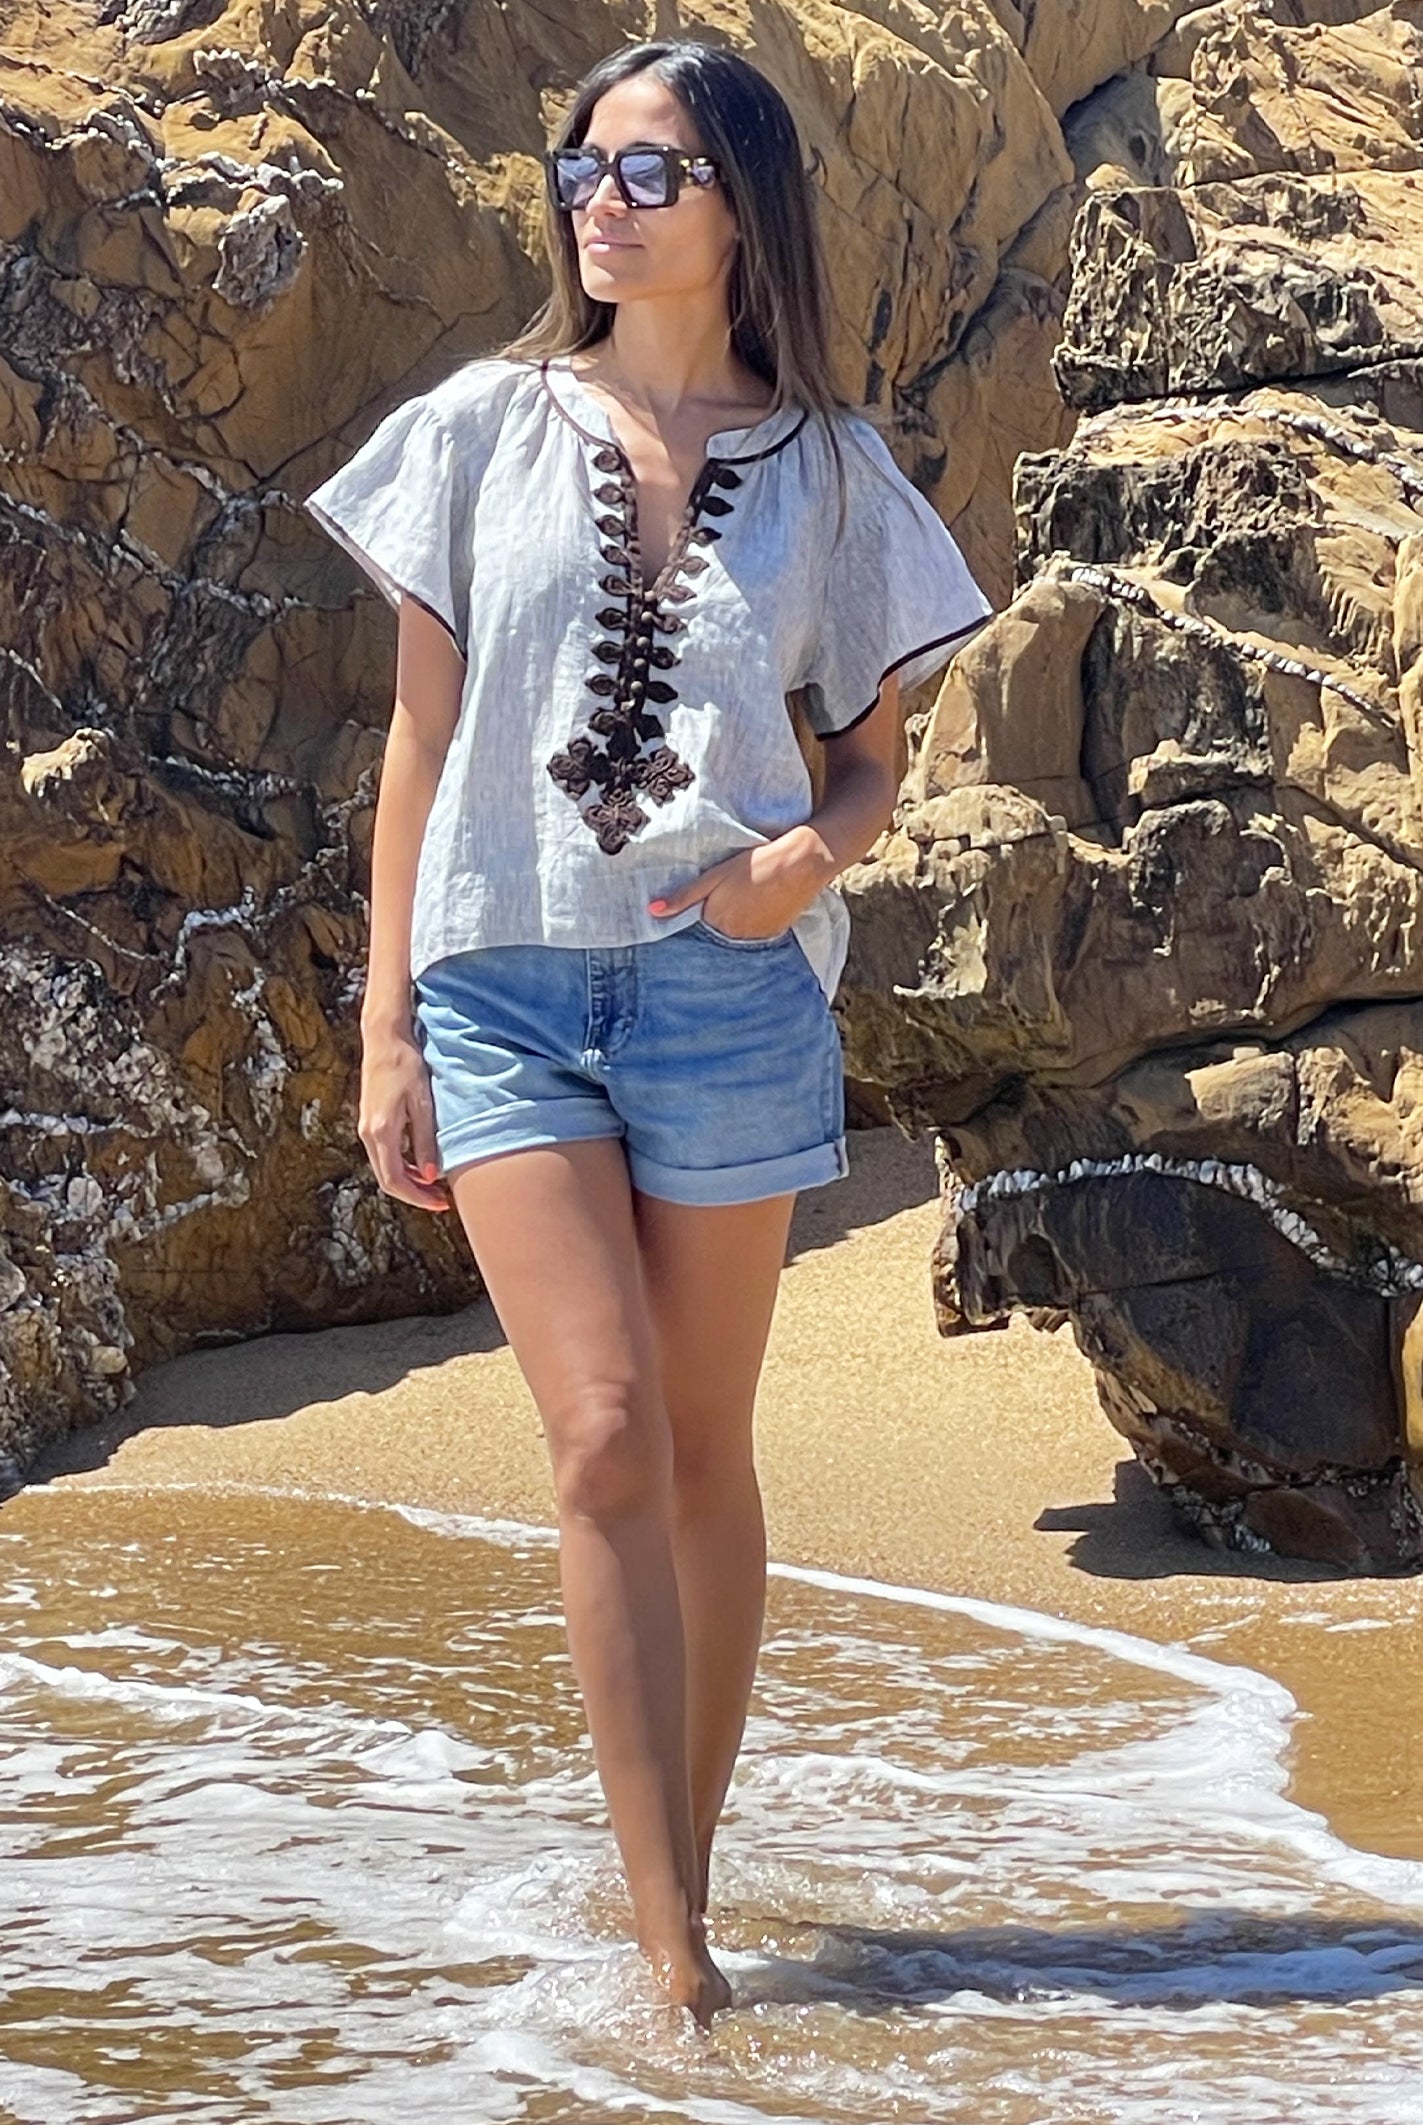 A model walking on a beach wearing a Rose and Rose striped linen Imperia top, denim shorts and sunglasses.